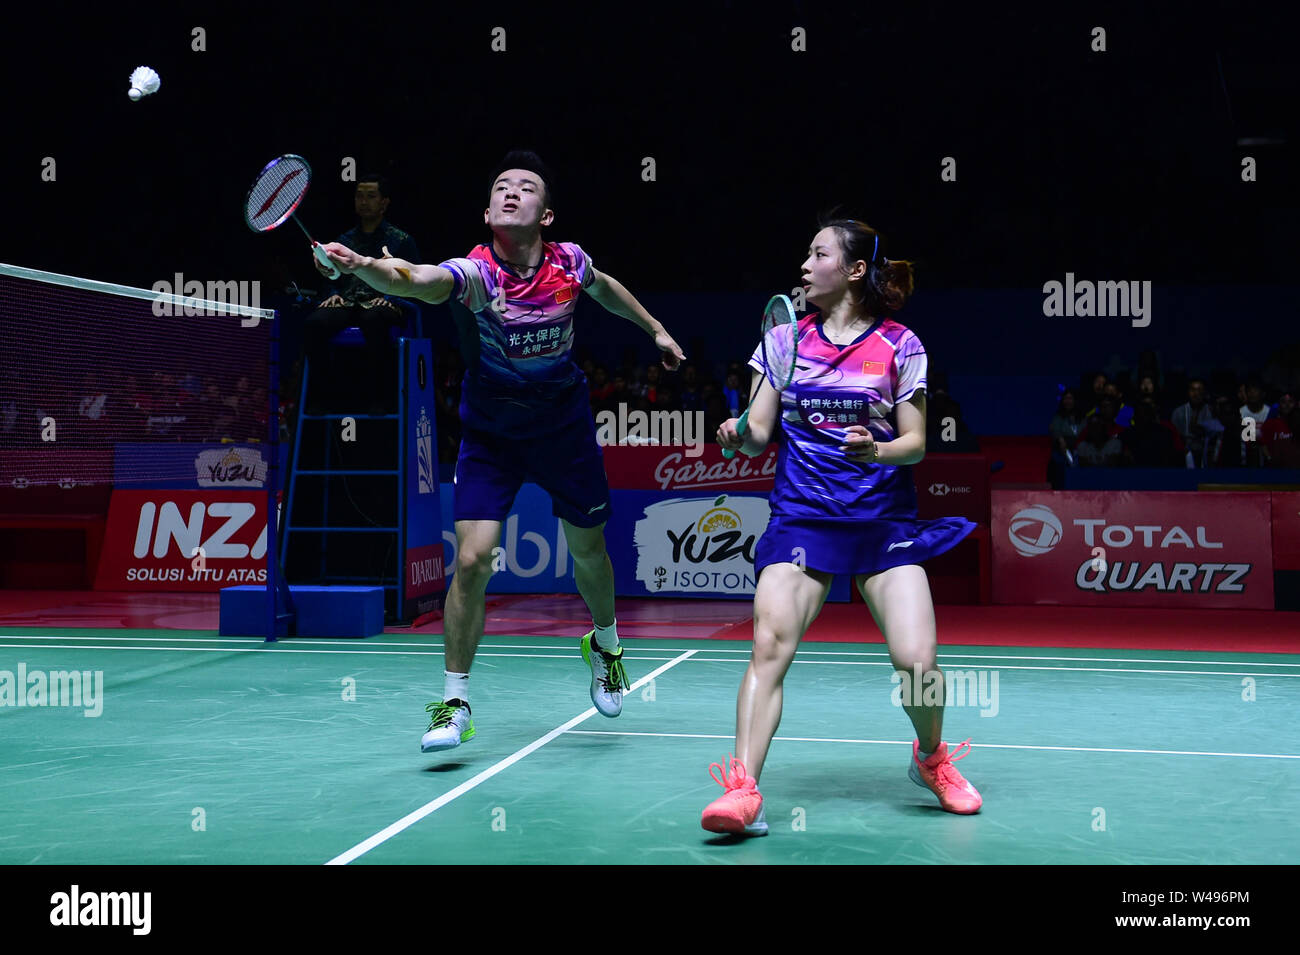 Jakarta, Indonesia. 21st July, 2019. Zheng Siwei (L)/Huang Yaqiong compete  during the mixed doubles final match between Zheng Siwei/Huang Yaqiong of  China and their compatriots Wang Yilyu/Huang Dongping at Indonesia Open 2019